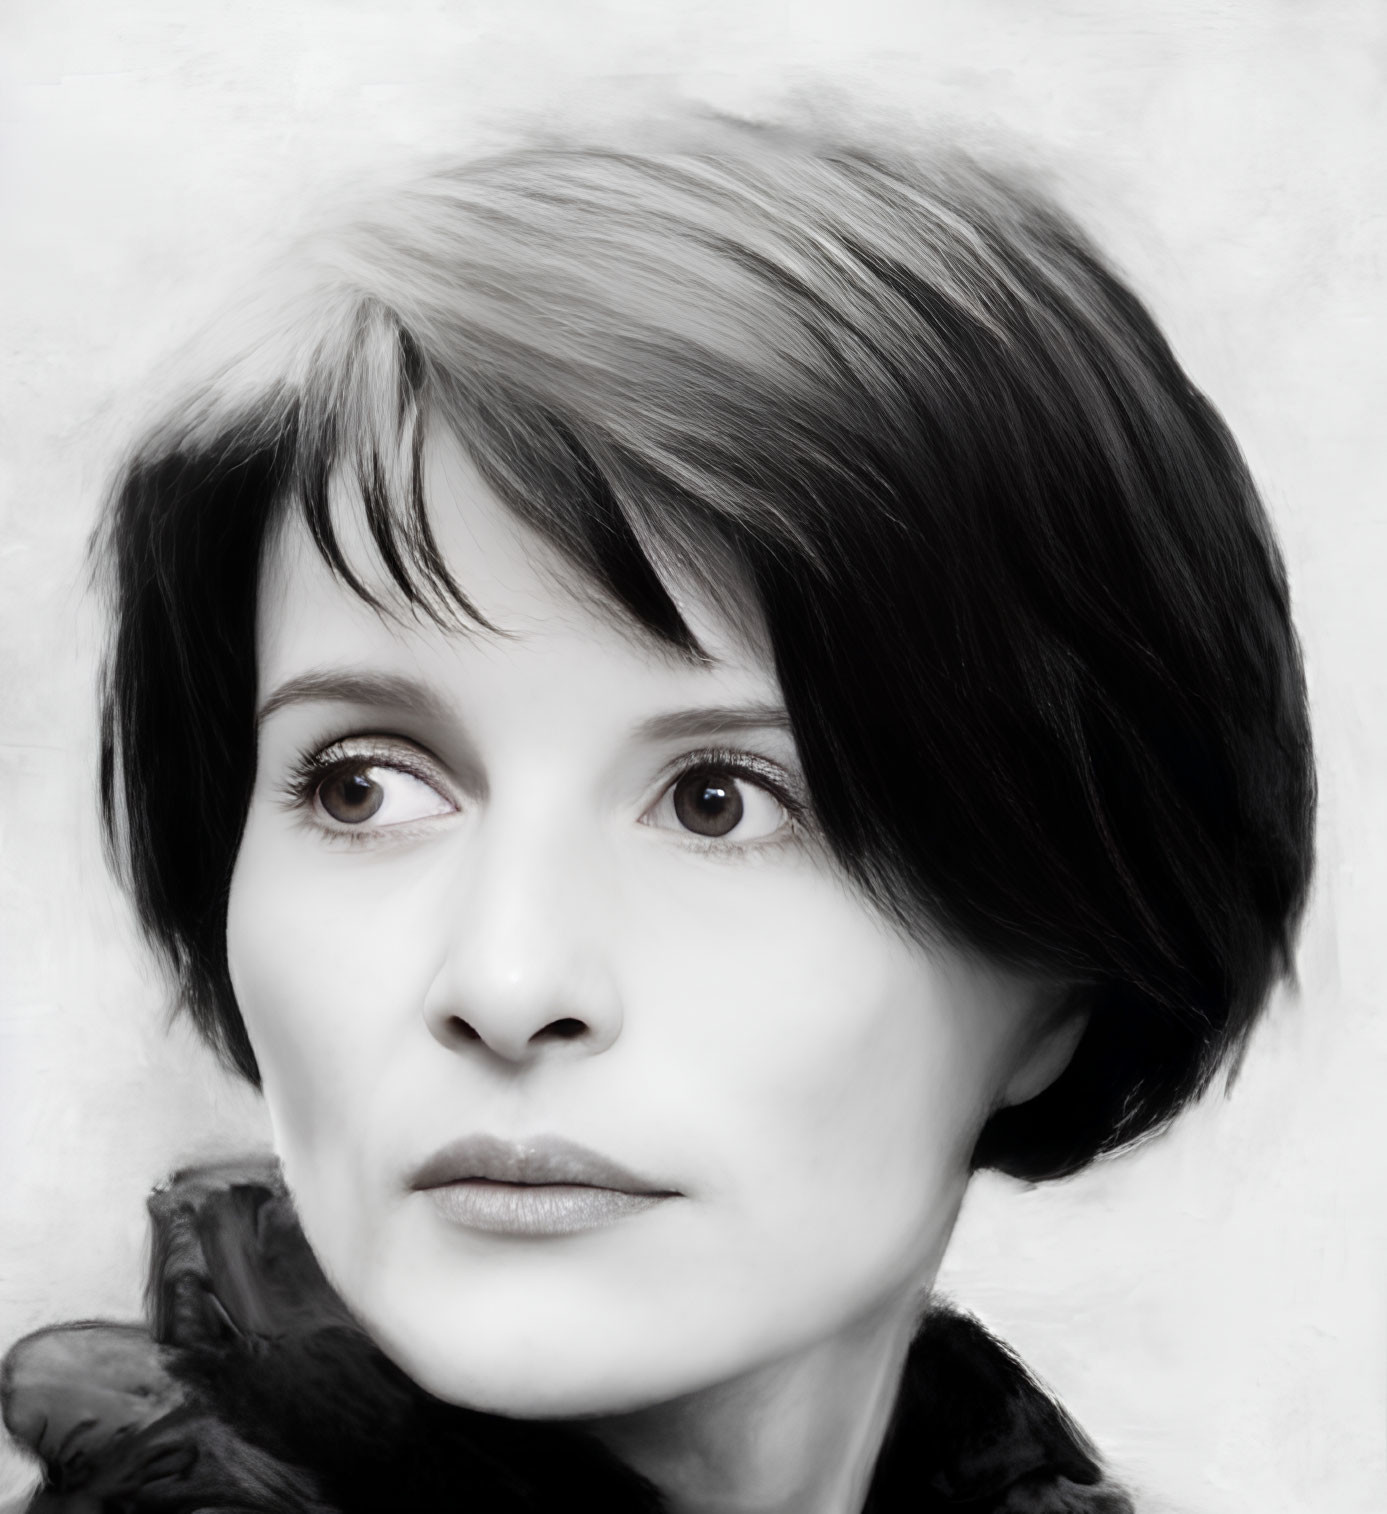 Digital painting: Woman with short black hair and fair skin, looking to the side on white background